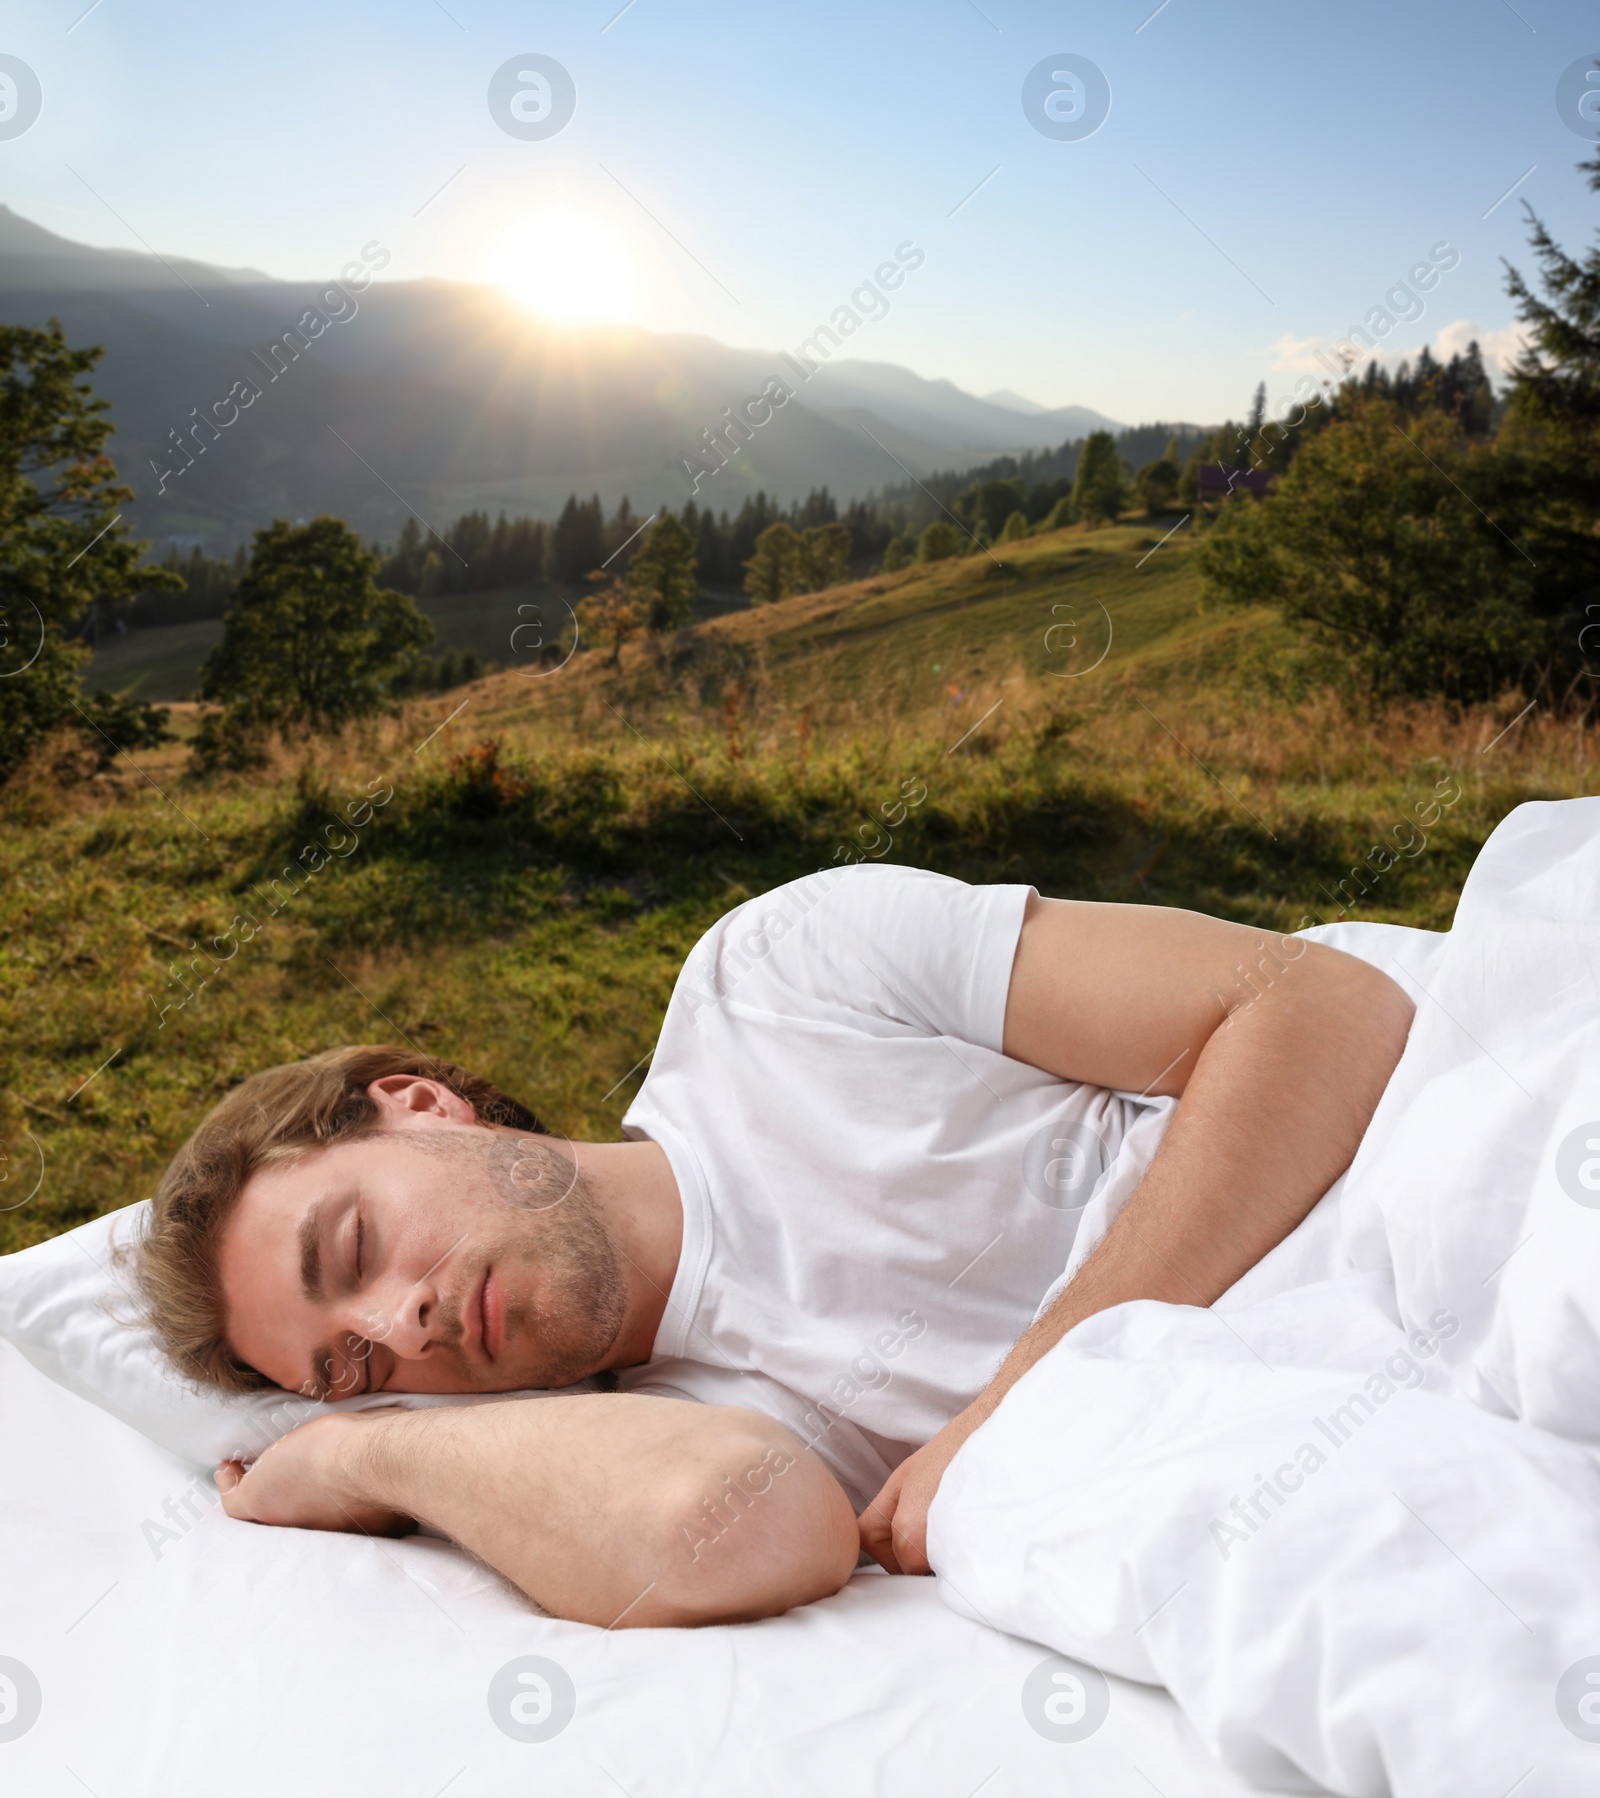 Image of Man sleeping in bed and beautiful view of mountain landscape on background. Sleep well - stay healthy